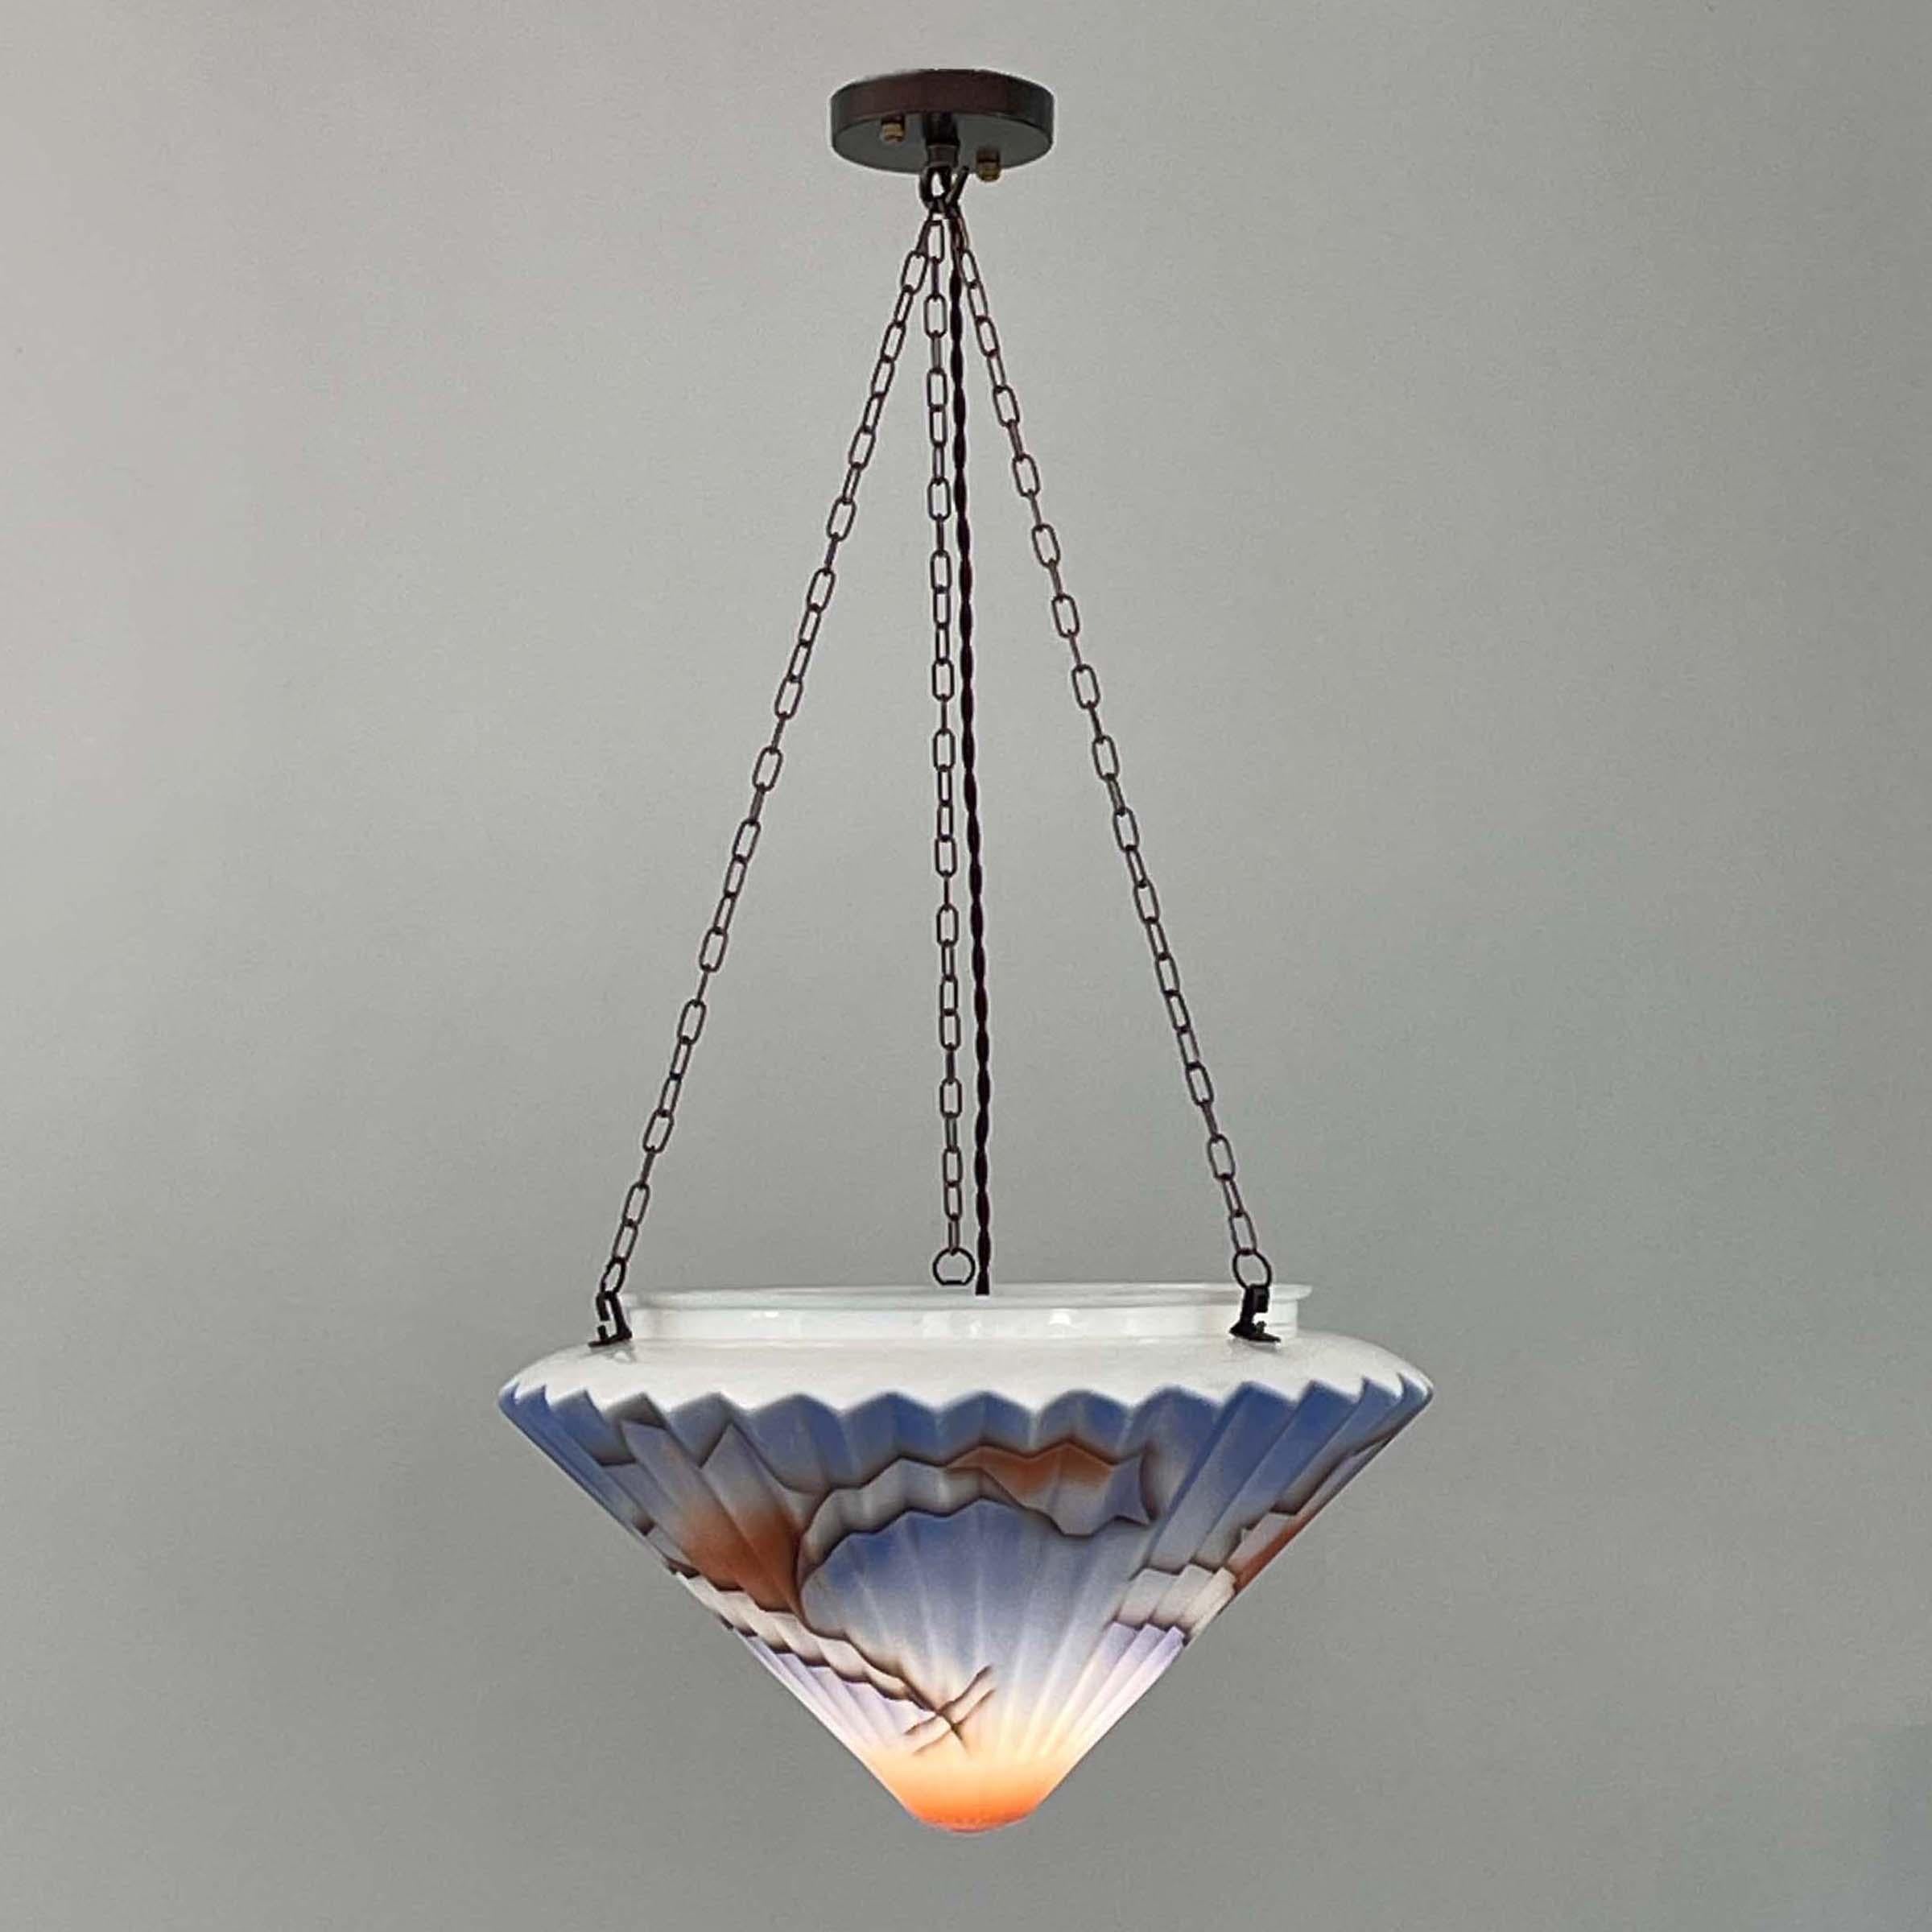 Art Deco Suspension Light, Enameled Glass and Bronzed Brass, Germany 1930s For Sale 7